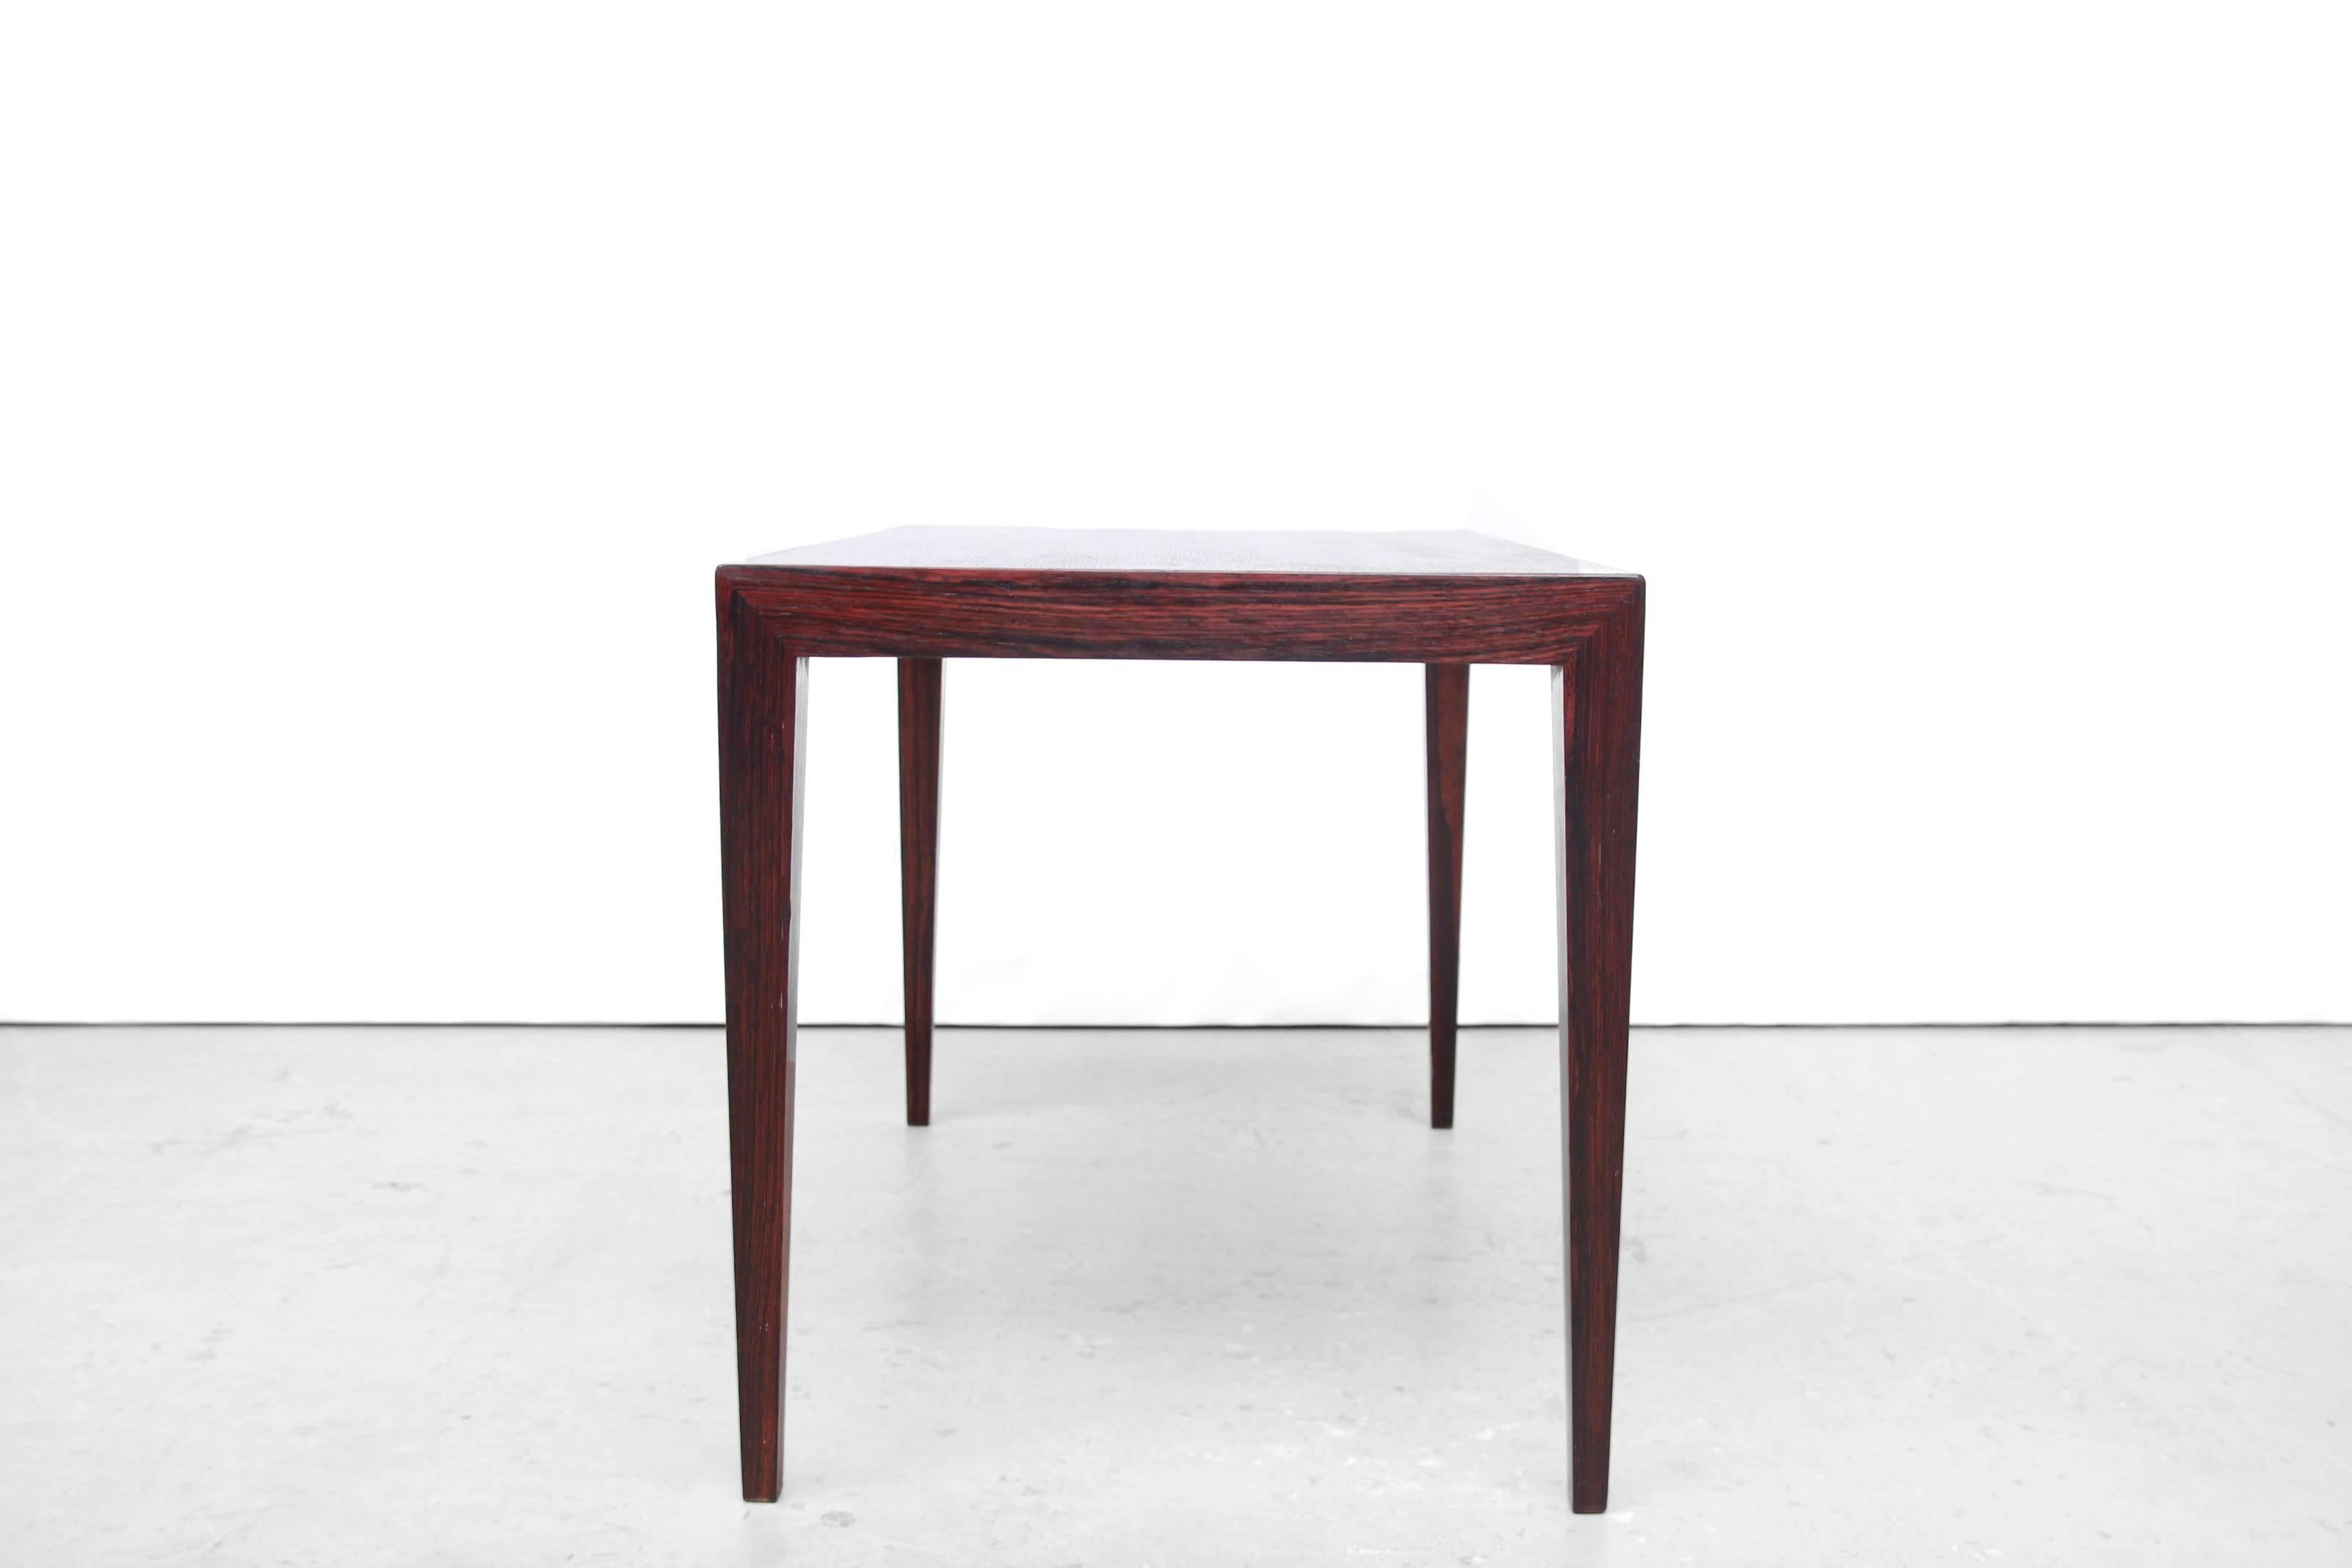 Very nice and subtle side table or small coffee table designed by Severin Hansen jr for Haslev Møbelfabrik from Denmark. Beautiful grained dark wood.
Look at the geometric connection of the legs to the tabletop. 
Severin Hansen is well-known by